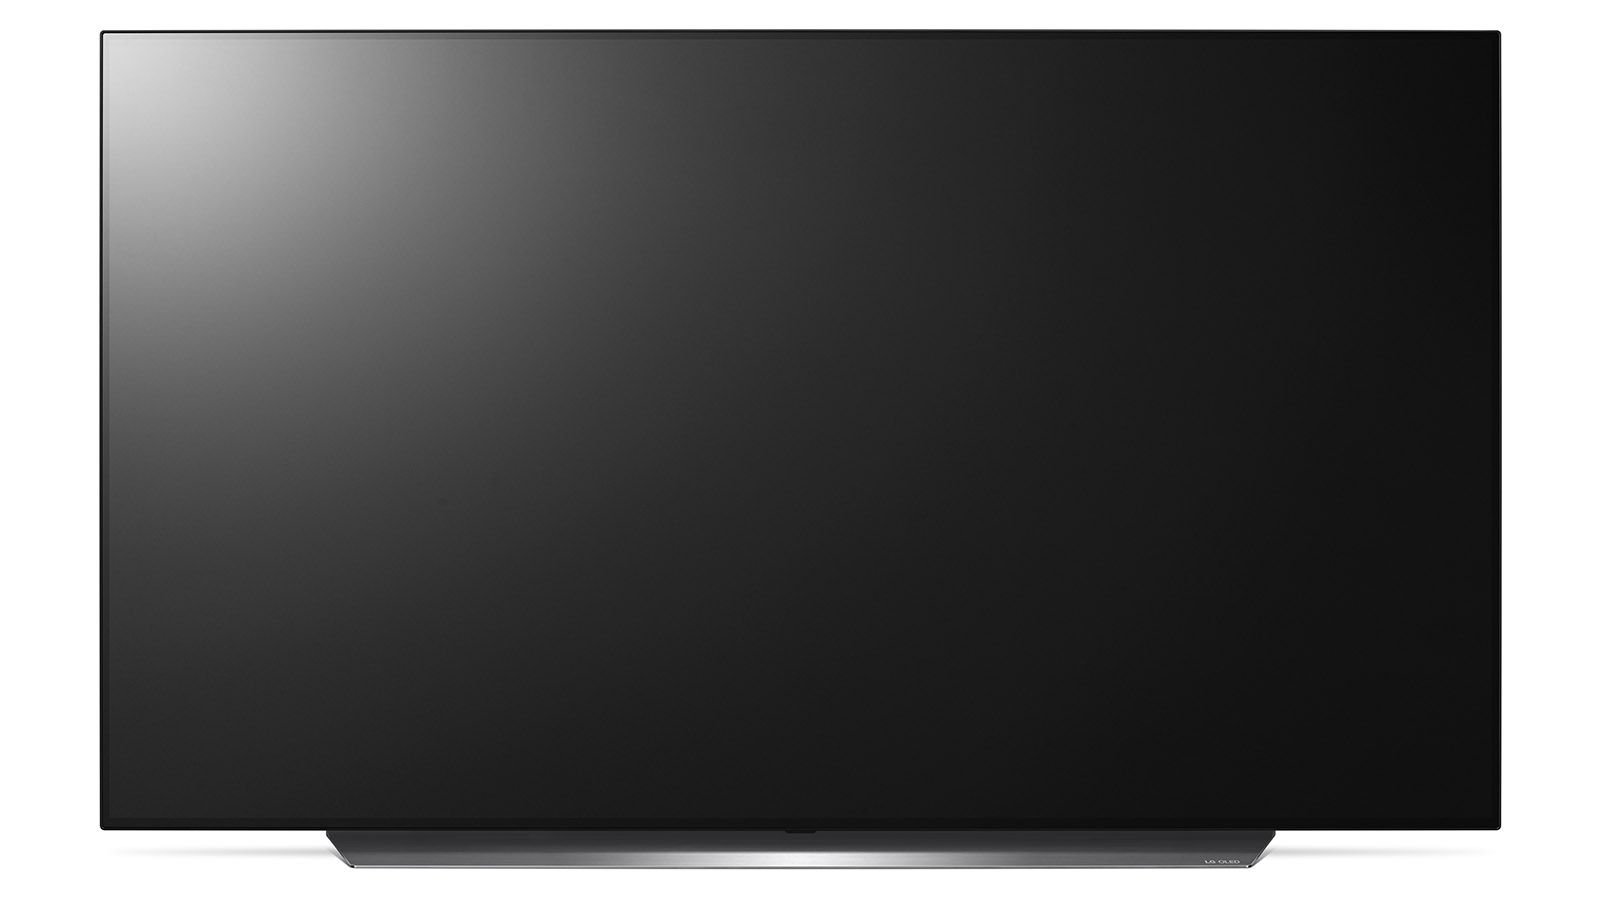 LG OLED C9 TV review image 4